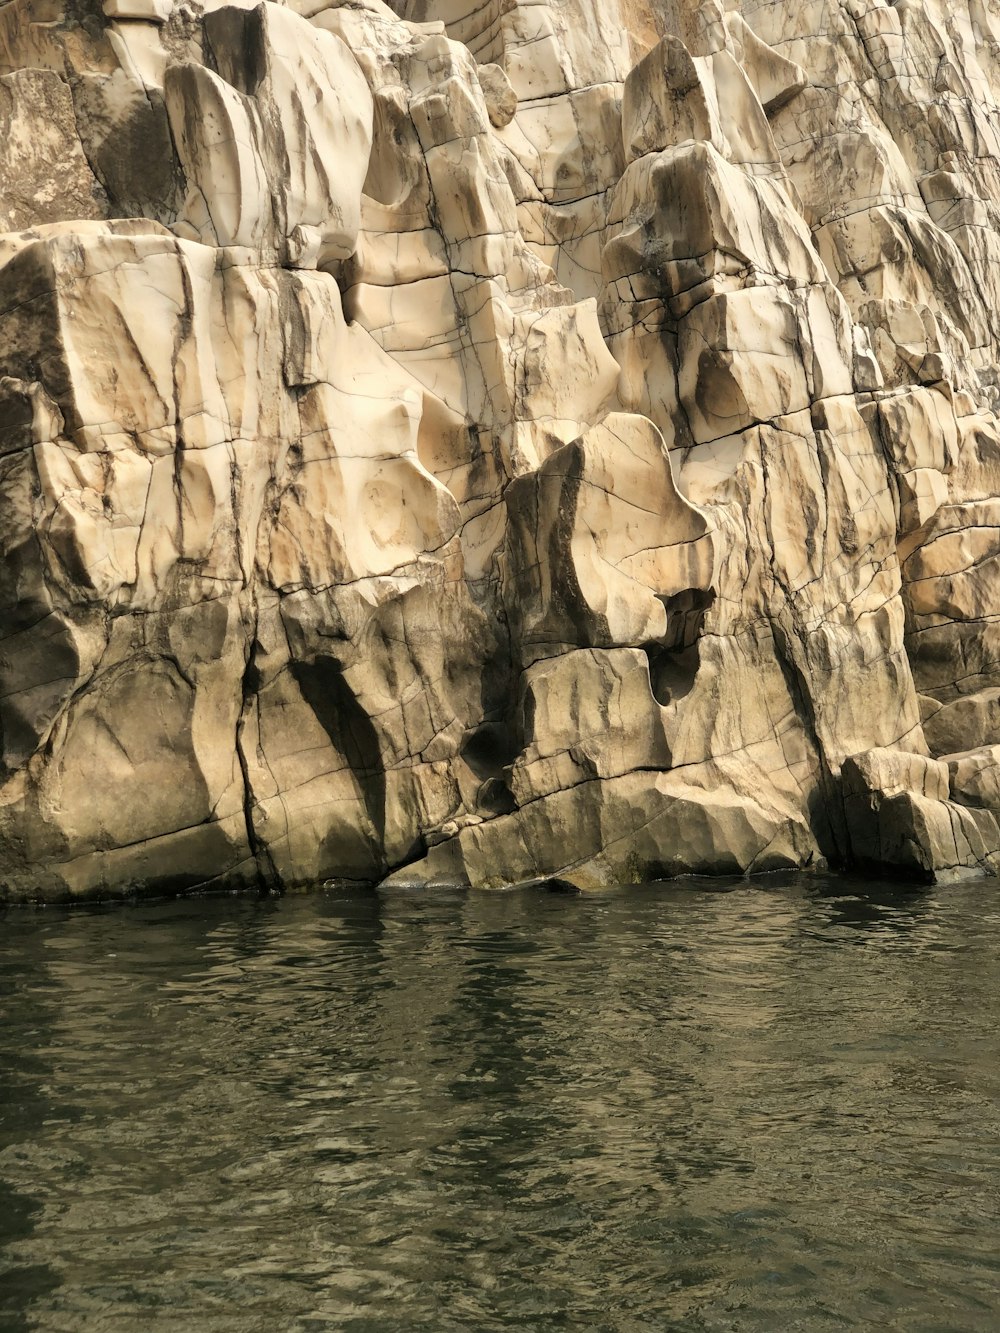 a large rock formation next to a body of water